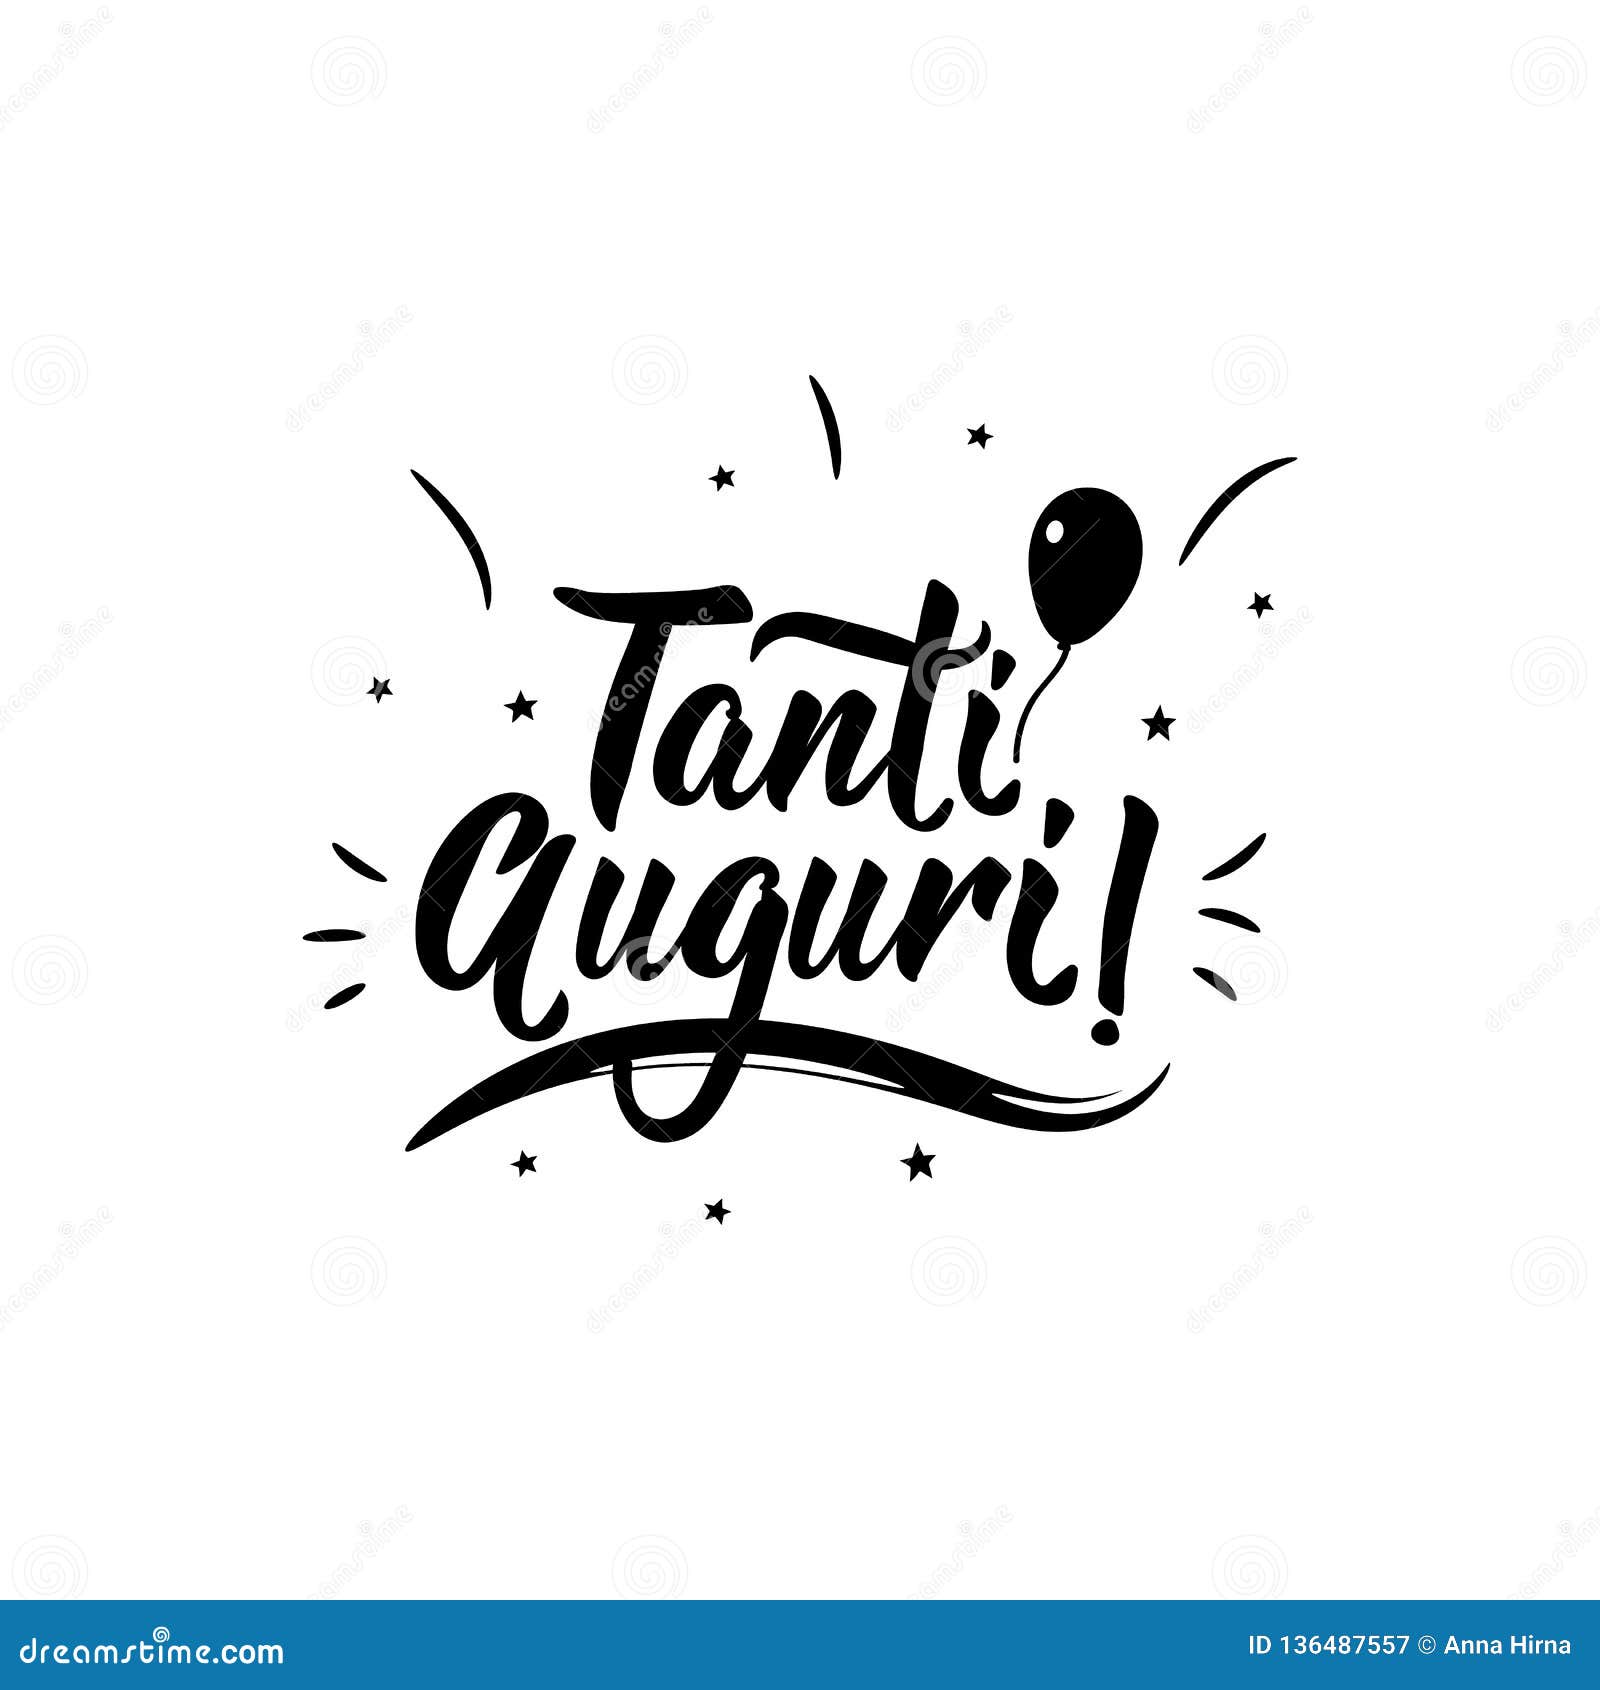 best wishes in italian. ink  with hand-drawn lettering. tanti auguri